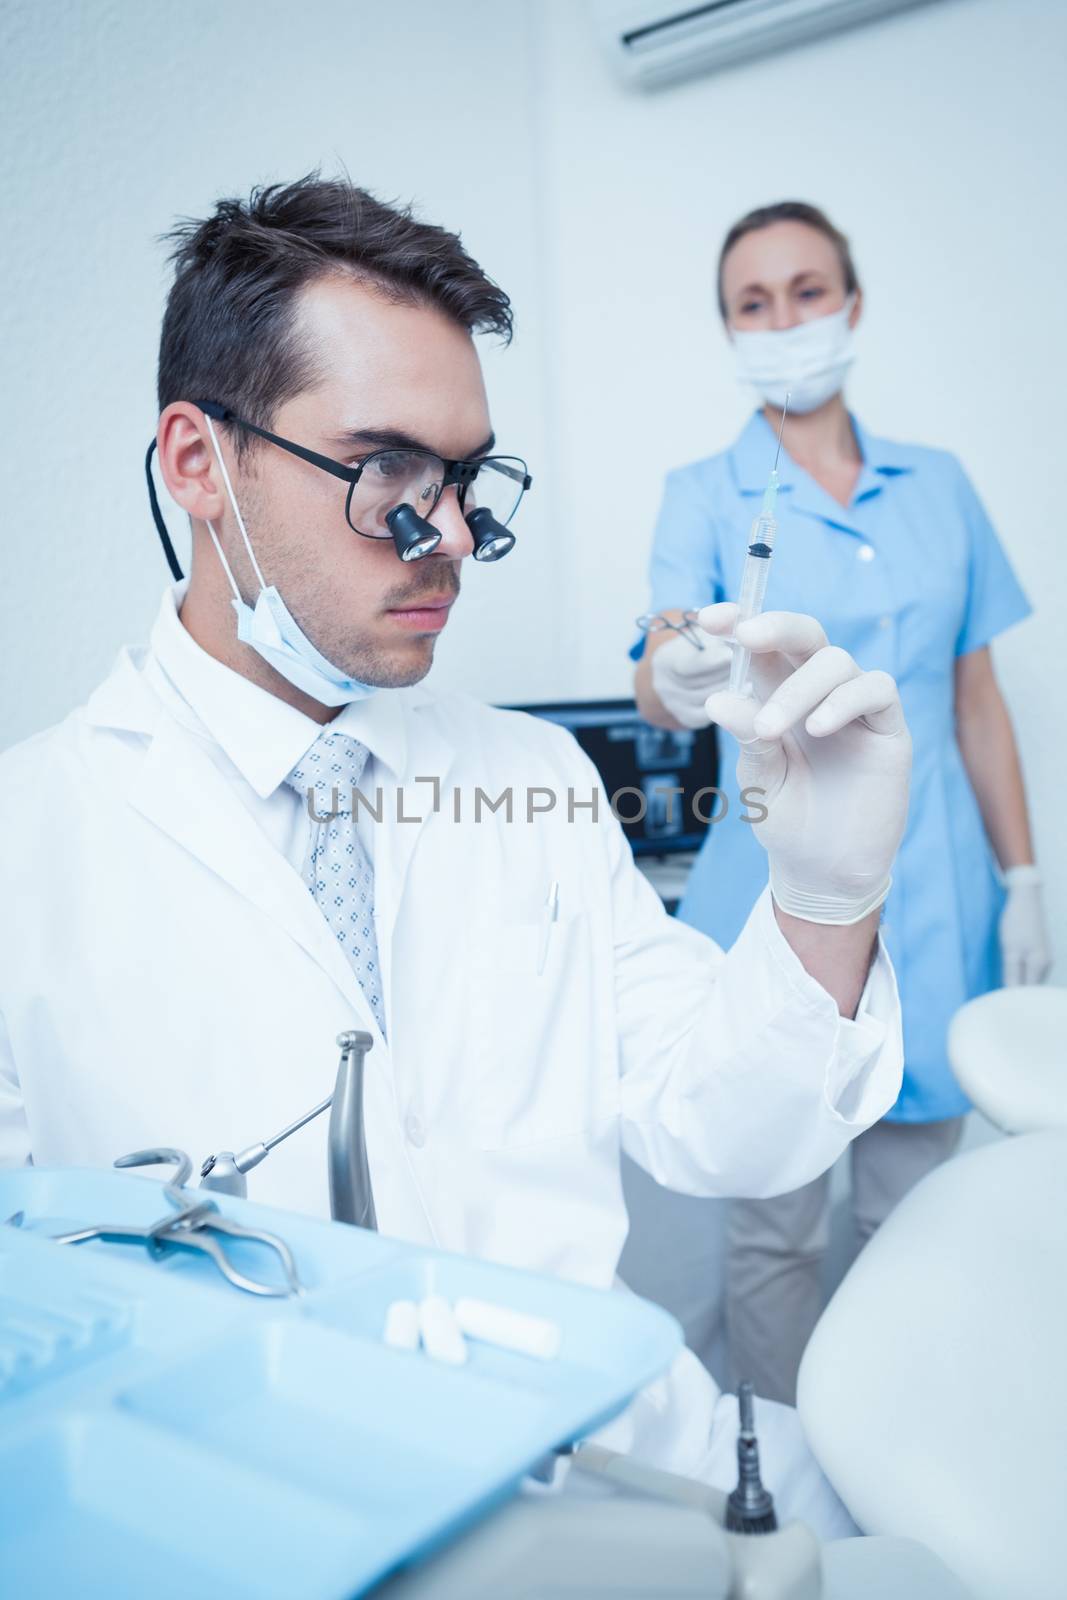 Dentist looking at injection by Wavebreakmedia